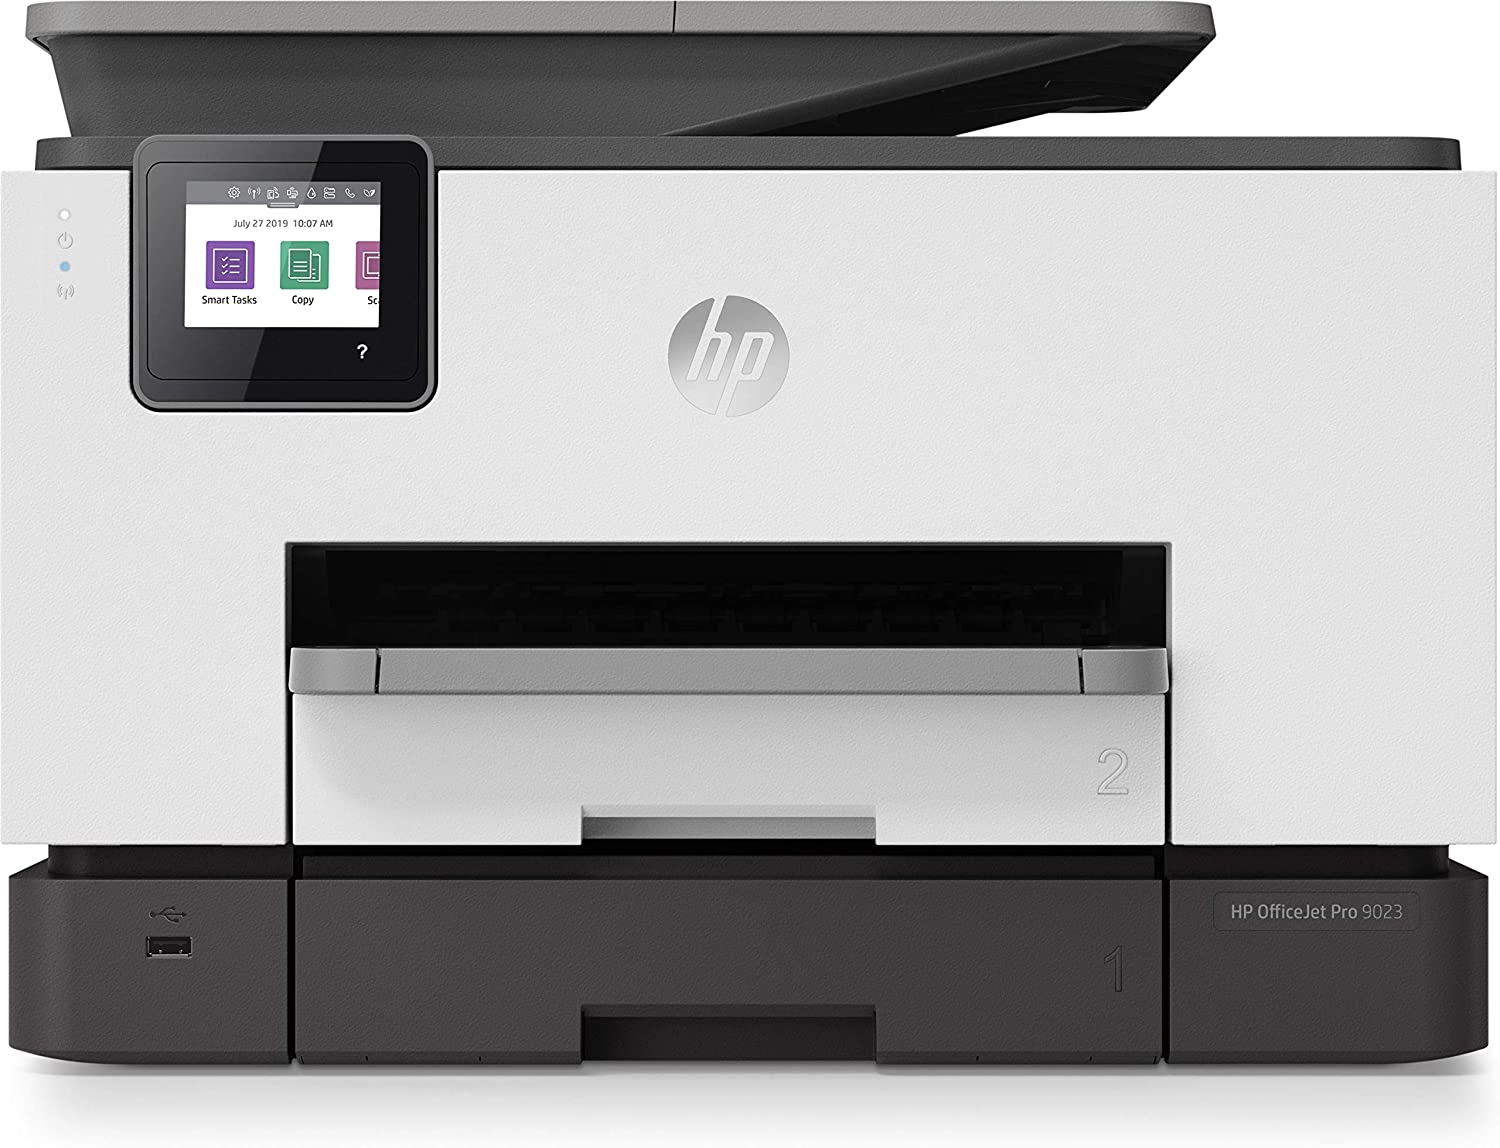 HP OfficeJet Pro 9023 All-in-One Printer2